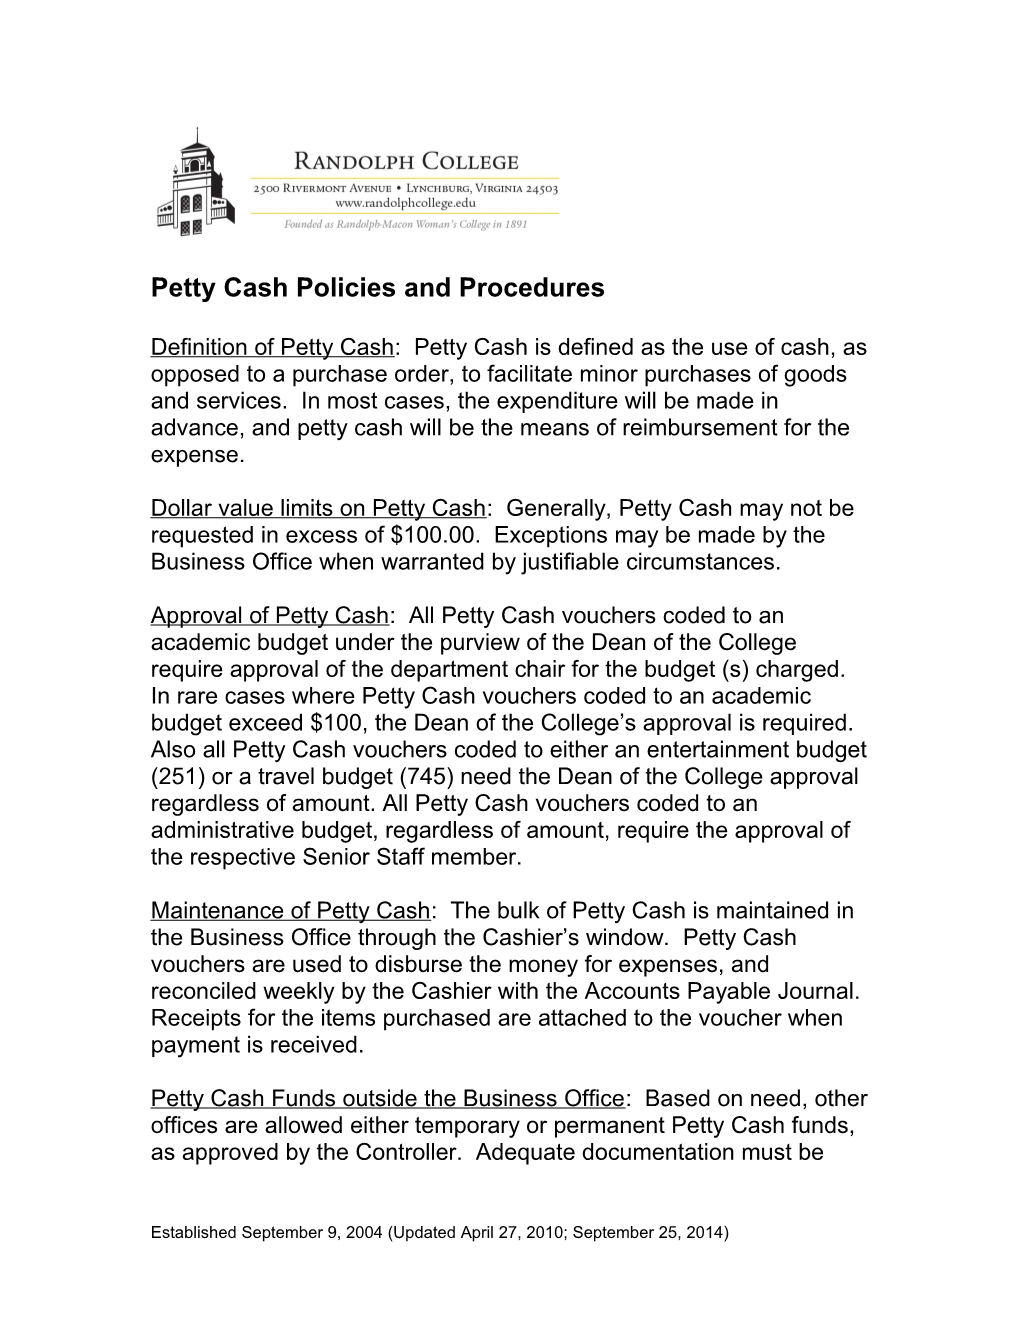 R-MWC Petty Cash Policies and Procedures